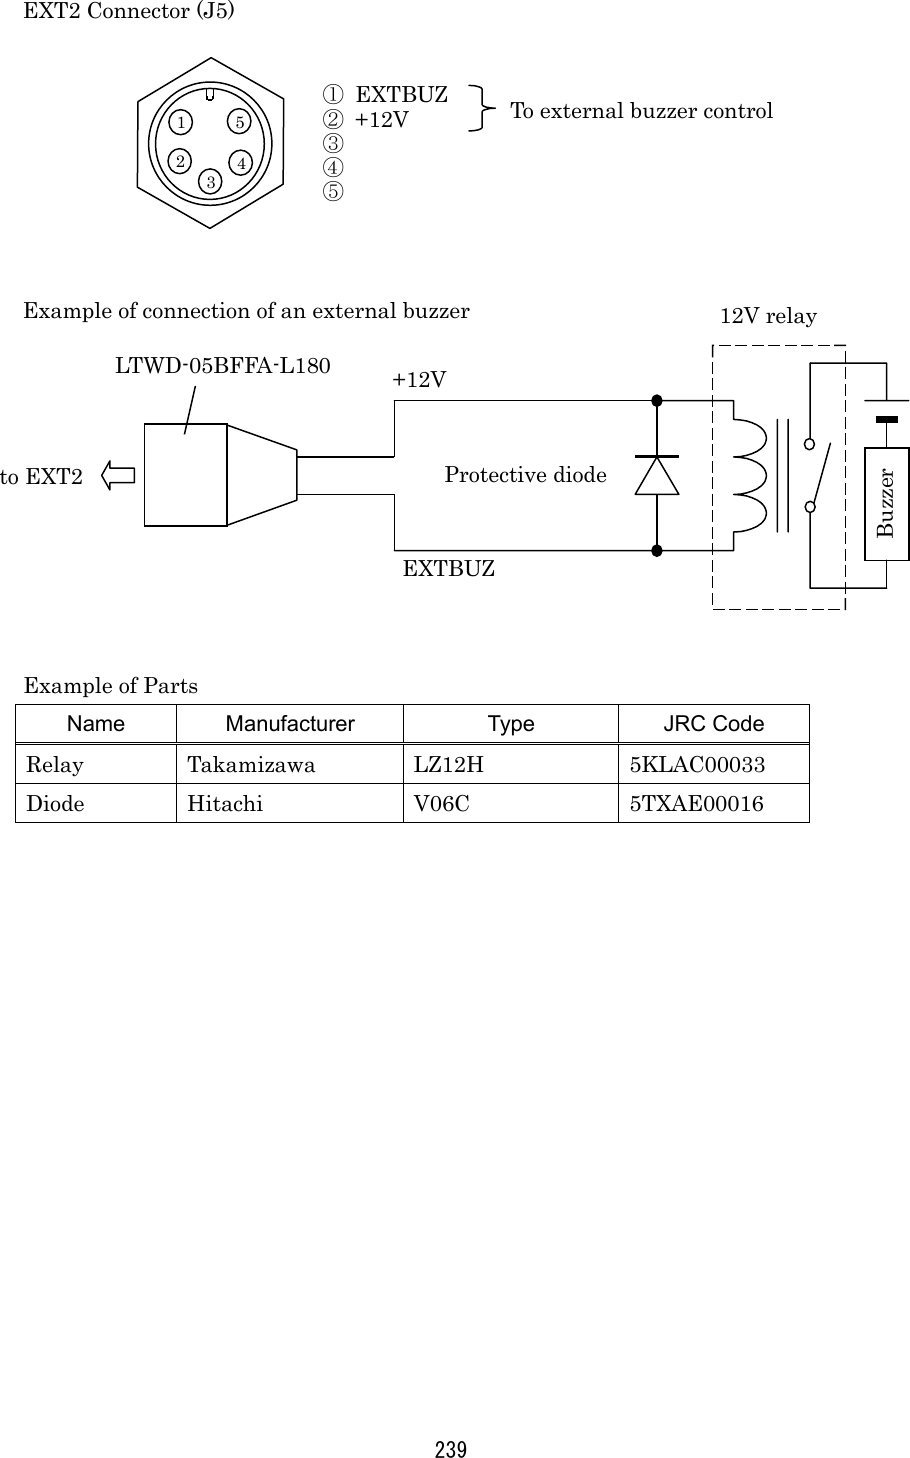 239 EXT2 Connector (J5)        Example of connection of an external buzzer          Example of Parts Name Manufacturer  Type  JRC Code Relay Takamizawa LZ12H  5KLAC00033 Diode Hitachi  V06C  5TXAE00016  1 2 3 4 5 ① EXTBUZ ② +12V ③ ④ ⑤ To external buzzer control Buzzer EXTBUZ +12V 12V relay Protective diode to EXT2 LTWD-05BFFA-L180 